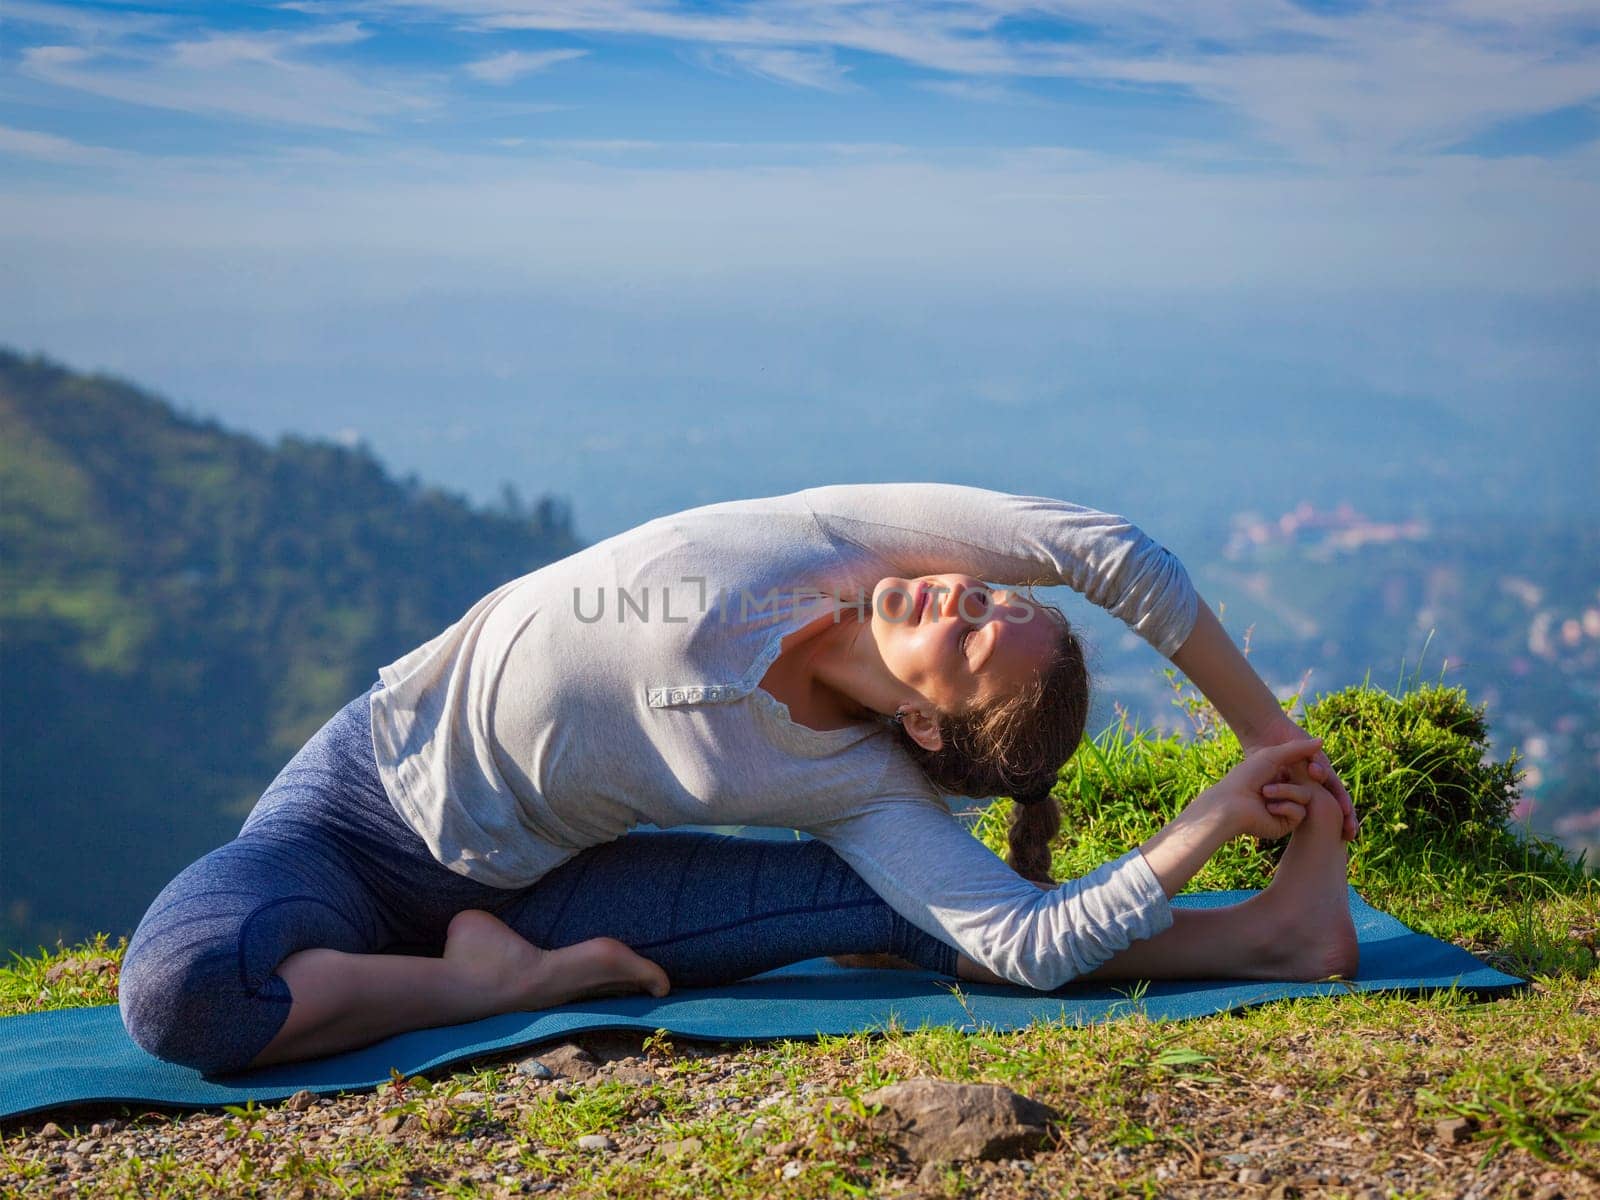 Yoga outdoors - young sporty fit woman doing Hatha Yoga asana parivritta janu sirsasana - Revolved Head-to-Knee Pose - in mountains in the morning